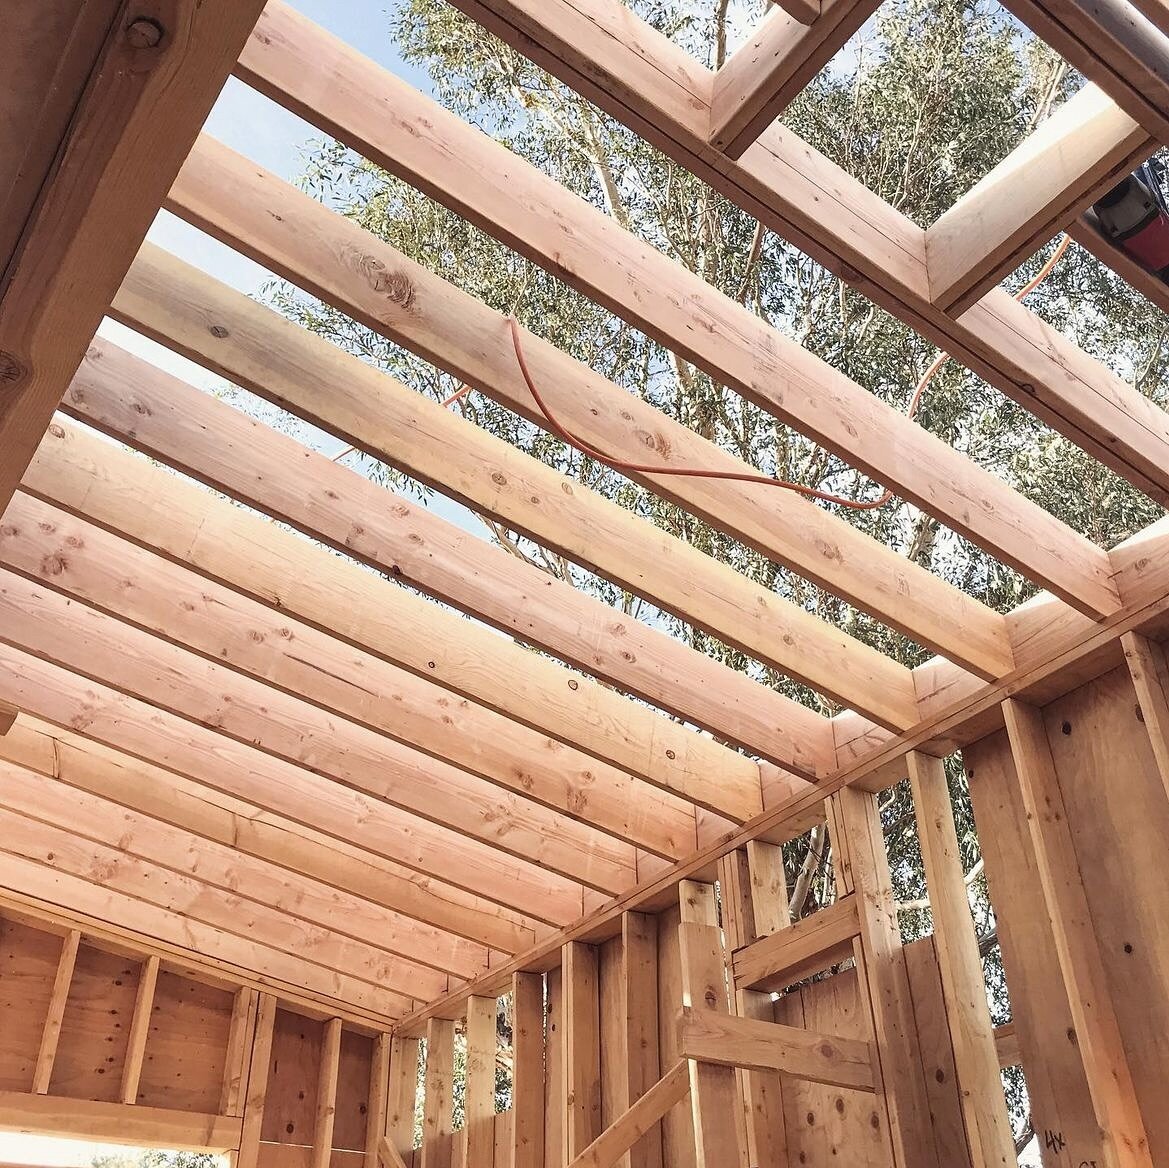 framing is one of our fav parts of the building process, especially before the roof is on, because of the way the sunlight shines through the open rafters and studs!
∘
∘
∘
#studio_collab #designbuild #builder #joshuatree #buildingdesign #buildingjour